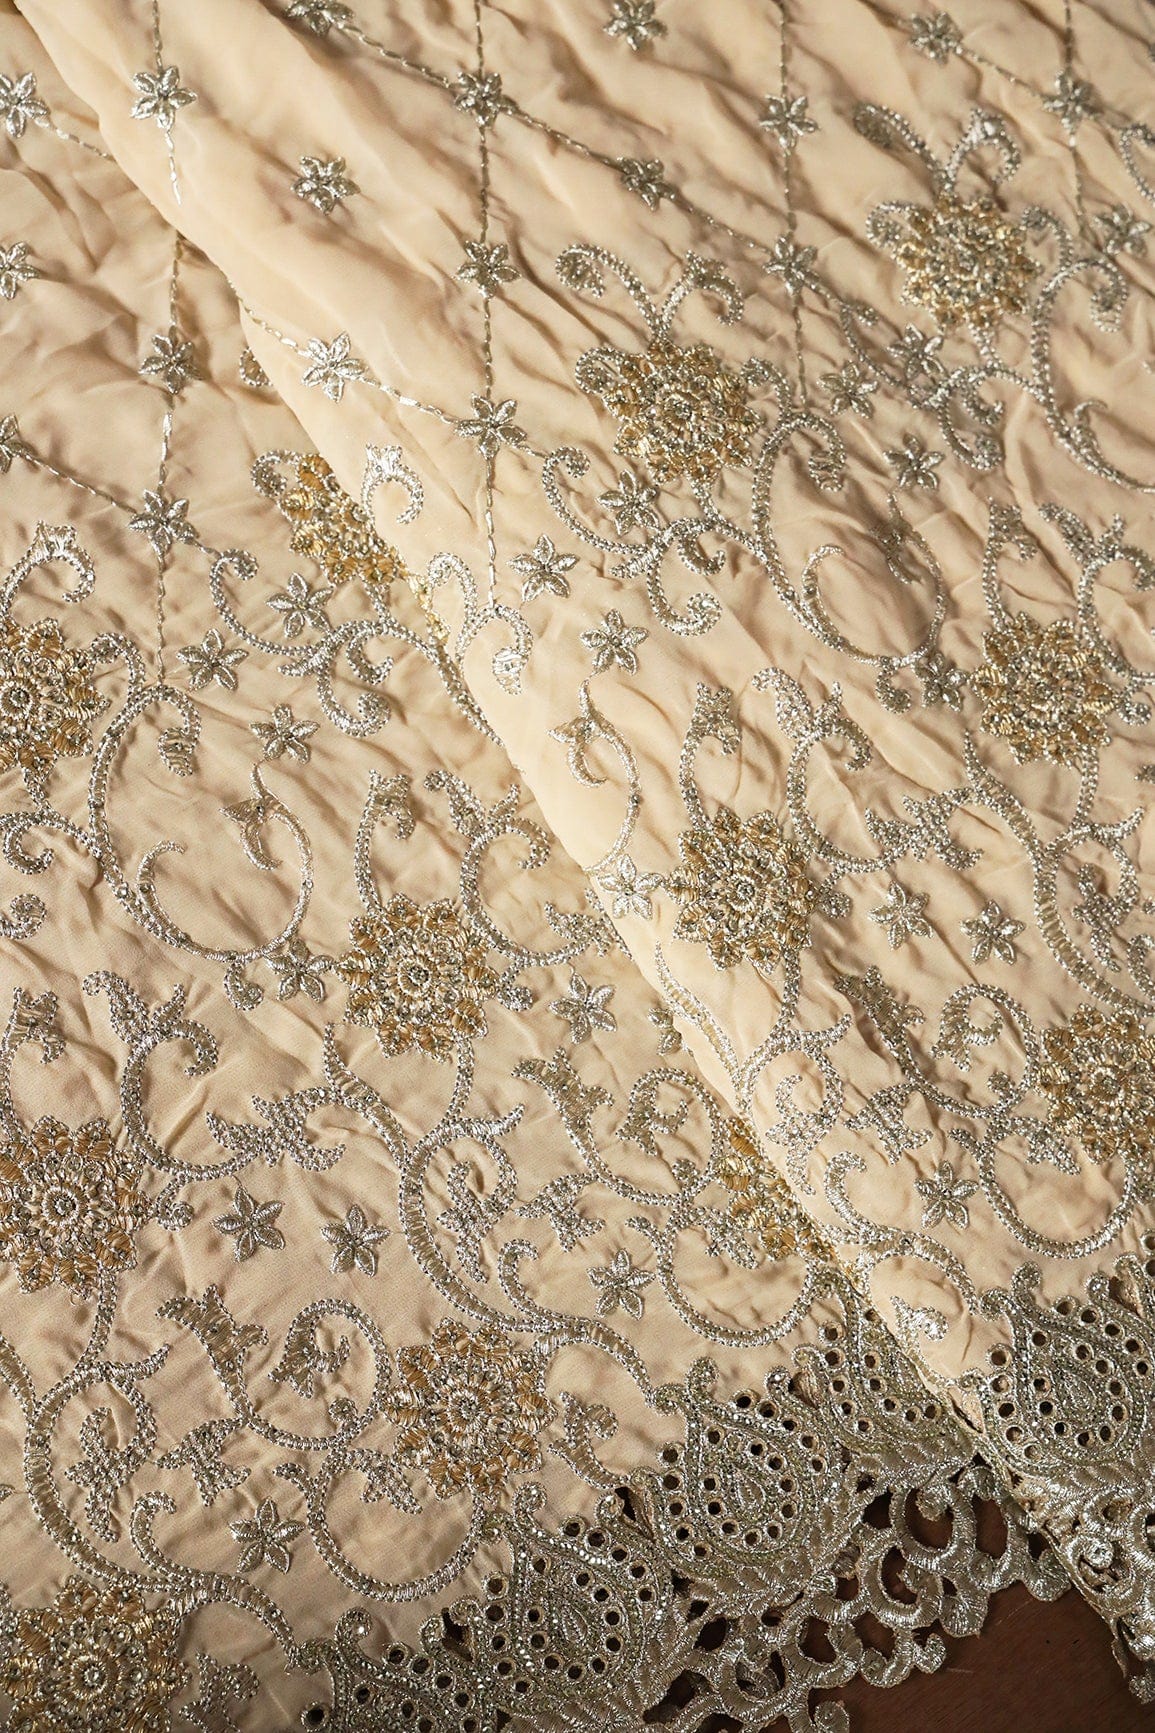 doeraa Embroidery Fabrics Big Width''56'' Gold And Silver Zari Floral Embroidery Work On Beige Georgette Fabric With Border